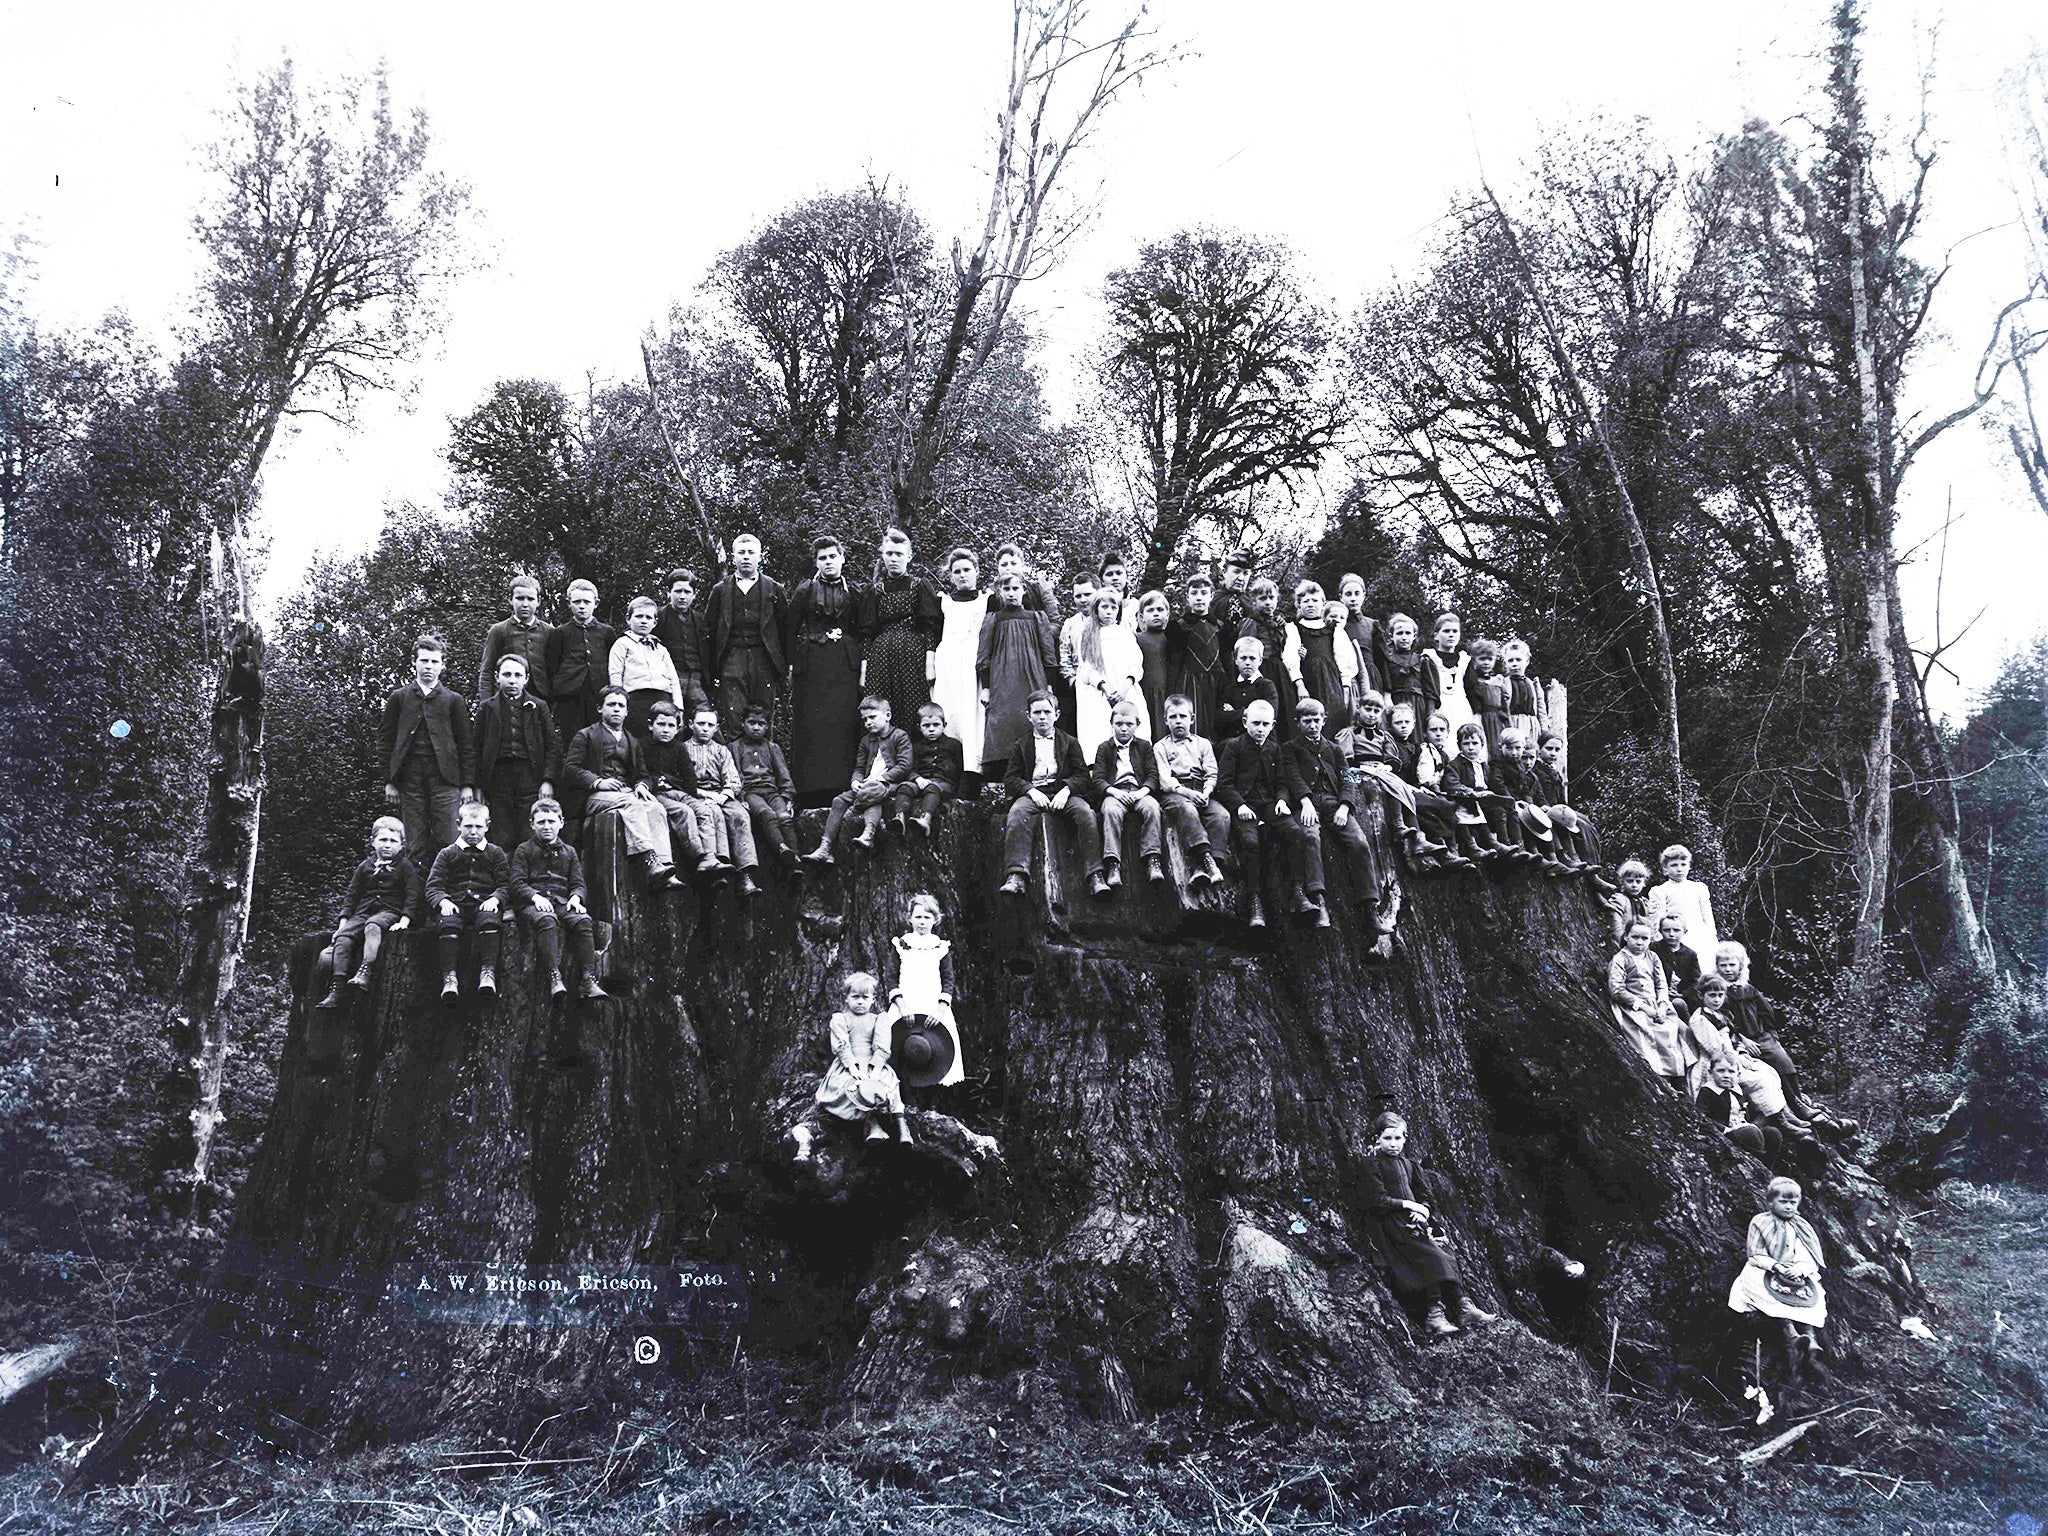 The Fieldbrook Stump, in California, not long after it was felled in 1890. Cuttings from it have been cultivated at the Eden Project